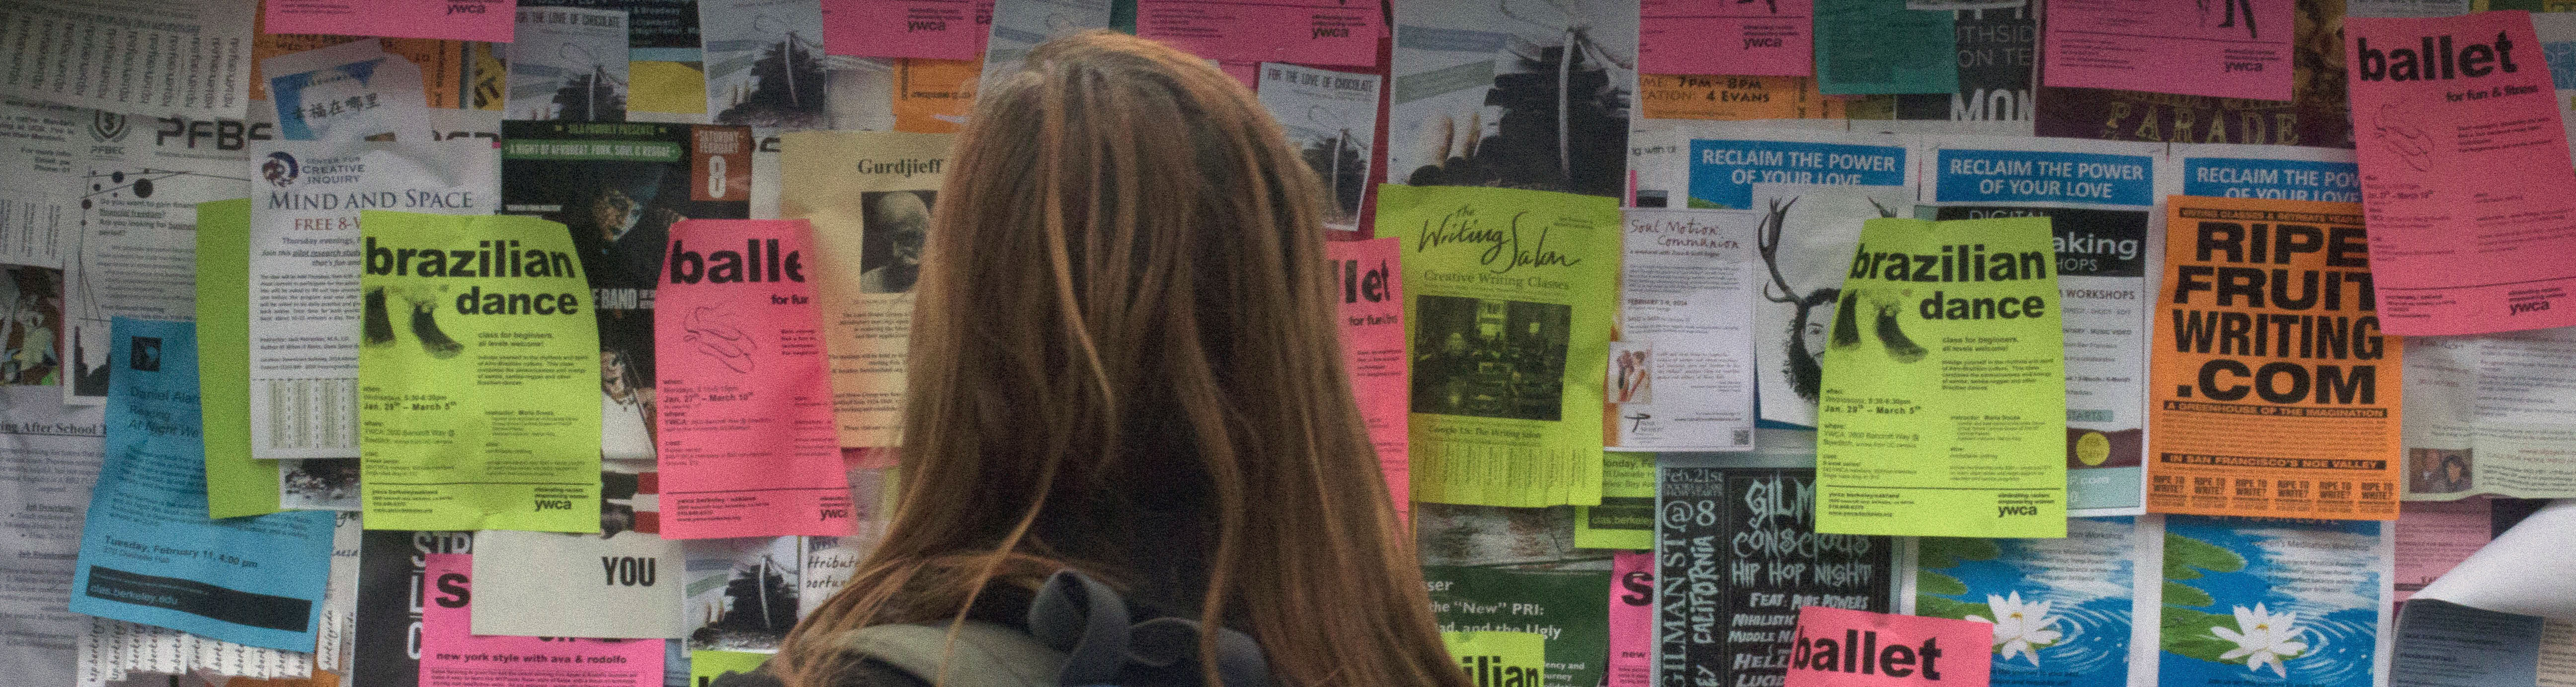 Student looking at fliers on Sproul Plaza.